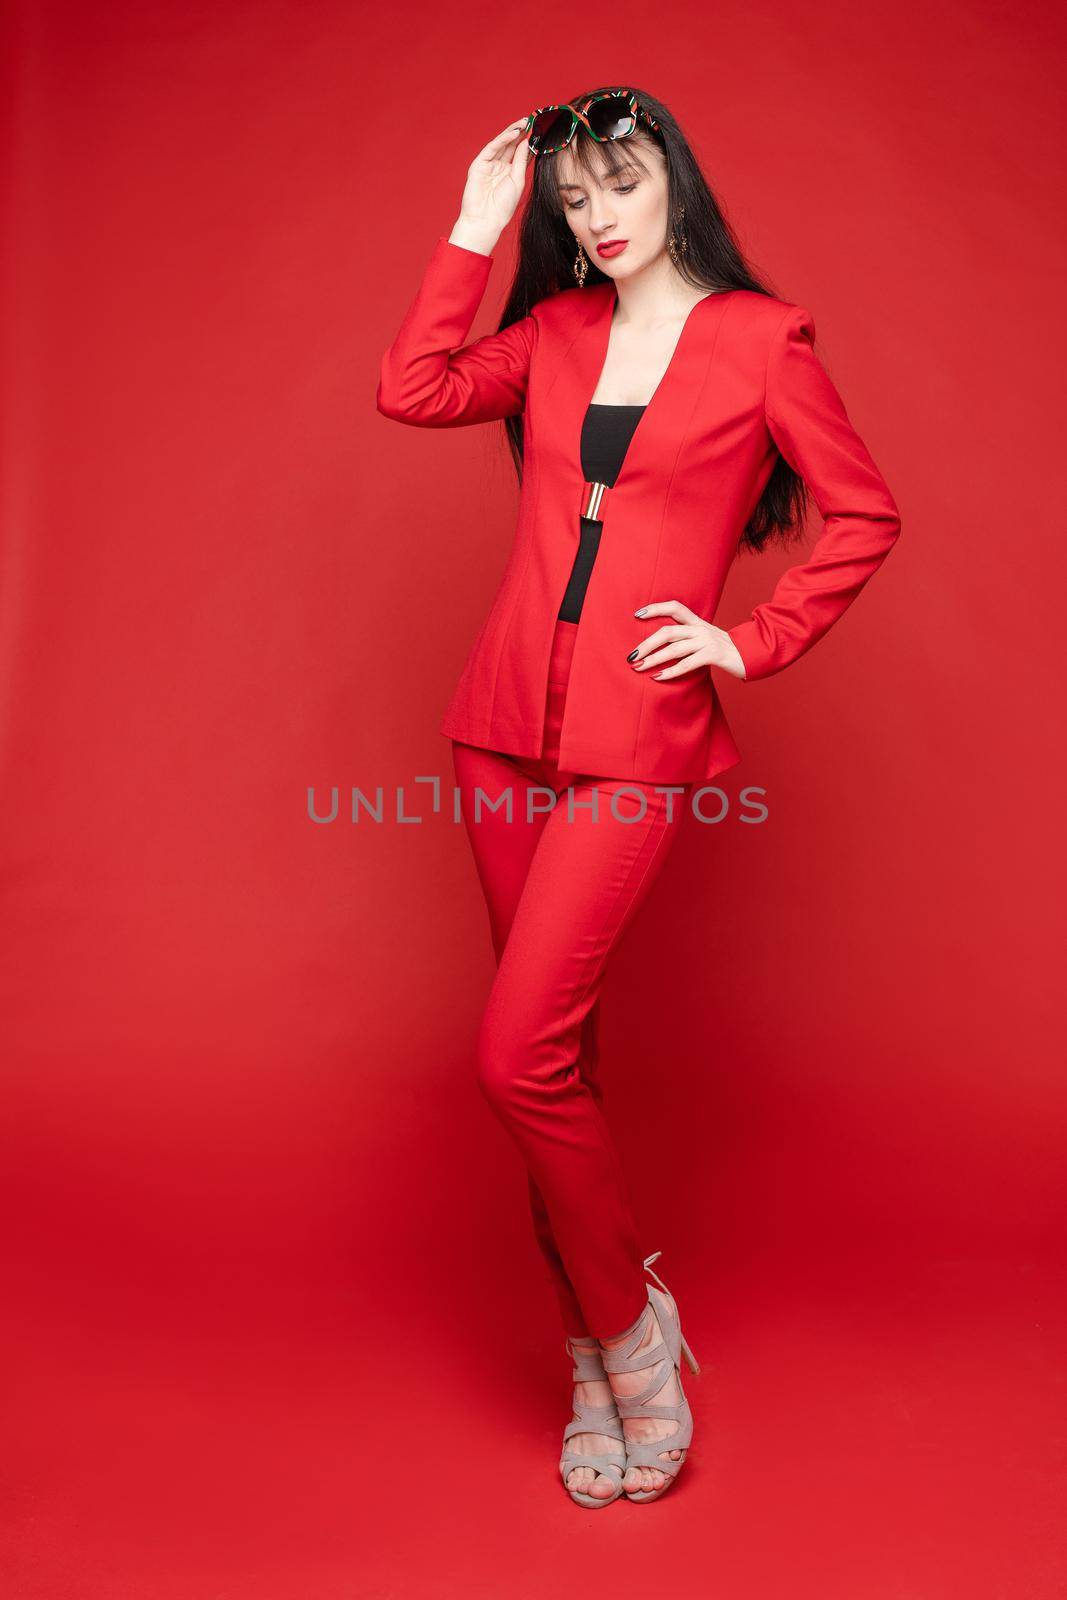 Side view of glamorous brunette posing in red smart suit and heels on red isolated background in studio. Young woman keeping glasses in hand and looking down. Concept of beauty and fashion.